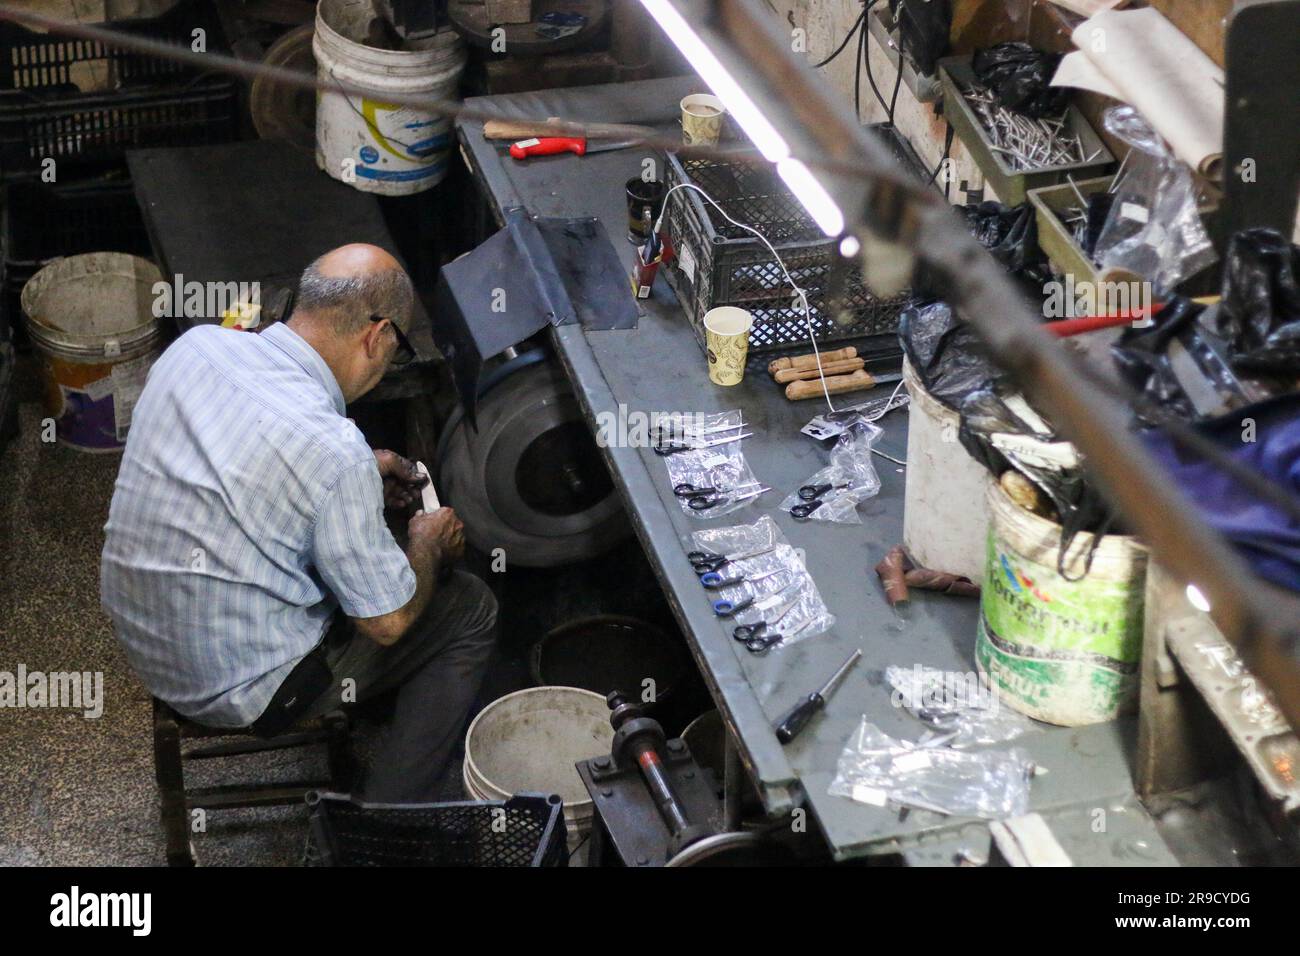 https://c8.alamy.com/comp/2R9CYDG/june-25-2023-gaza-palestine-25-june-2023-a-busy-knife-sharpening-workshop-in-gaza-city-ahead-of-the-forthcoming-eid-al-adha-celebrations-eid-al-adha-or-feast-of-sacrifice-is-a-major-feast-in-islam-which-is-celebrated-on-the-last-day-of-the-hajj-pilgrimage-it-is-a-tradition-to-sacrifice-an-animal-such-as-a-sheep-or-a-goat-during-eid-al-adha-to-remember-prophet-ibrahims-obedience-to-god-credit-image-ahmad-hasaballahimageslive-via-zuma-press-wire-editorial-usage-only!-not-for-commercial-usage!-2R9CYDG.jpg